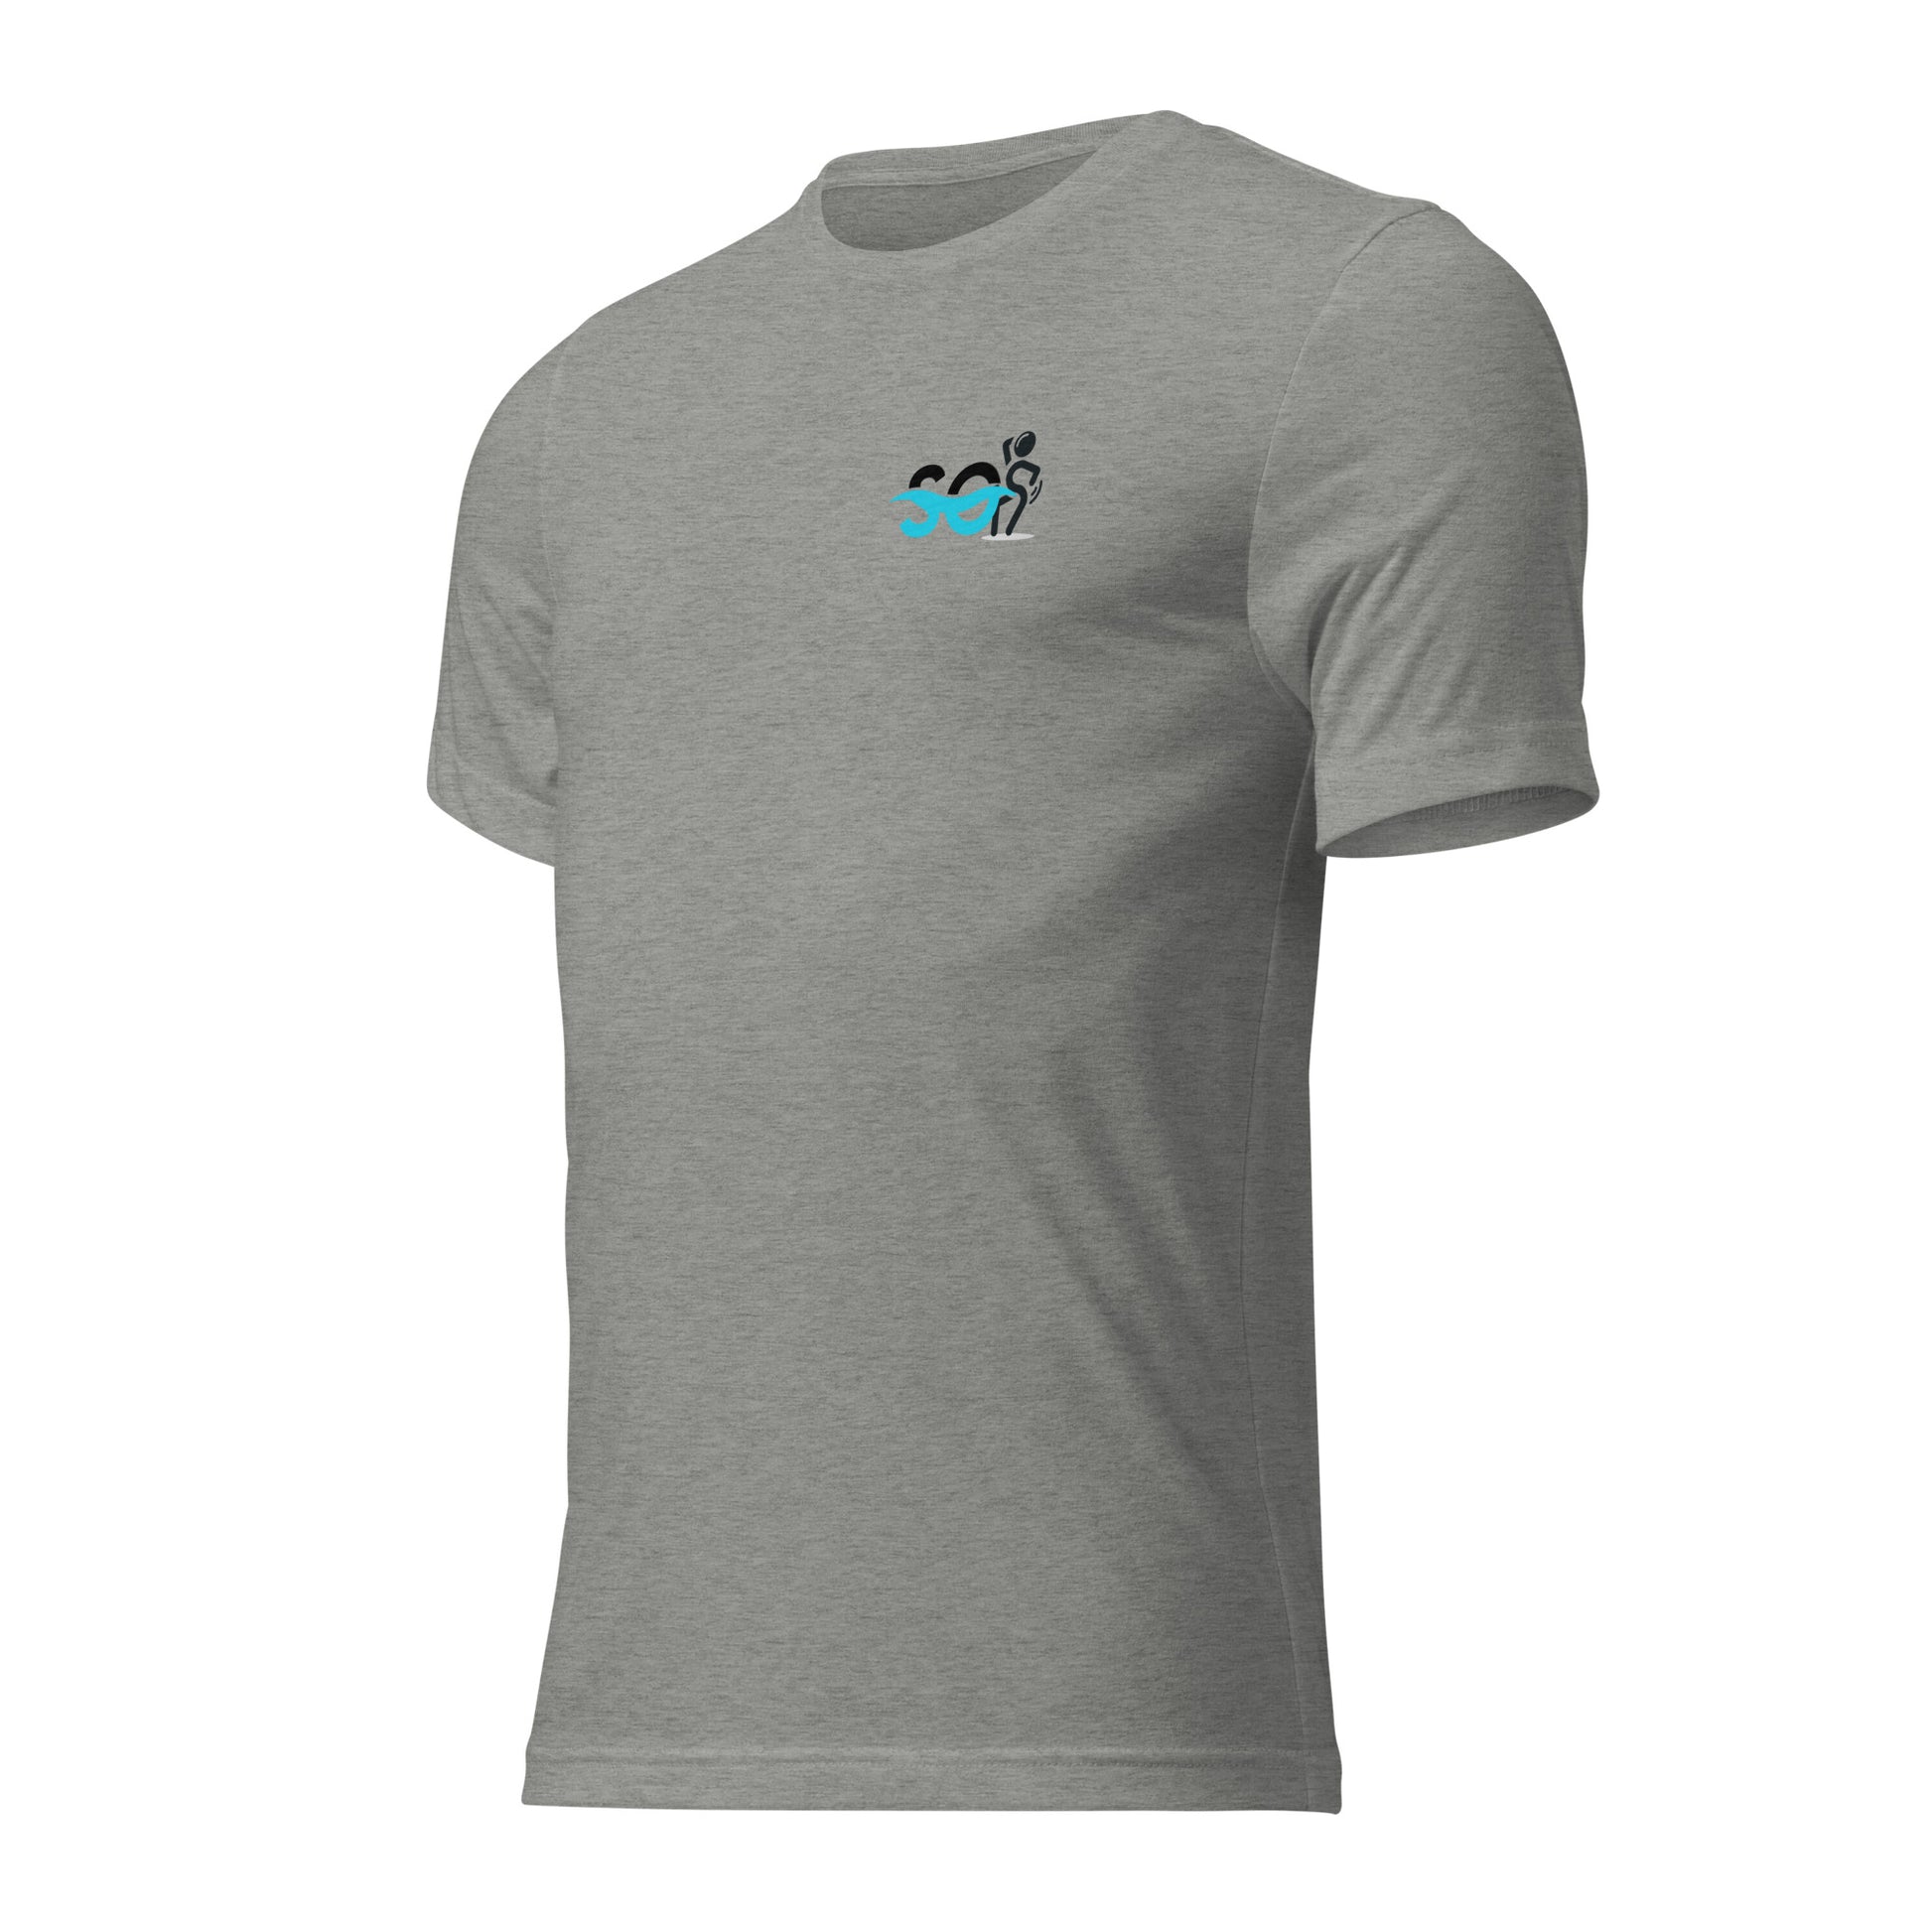 a grey t - shirt with a blue horse on it